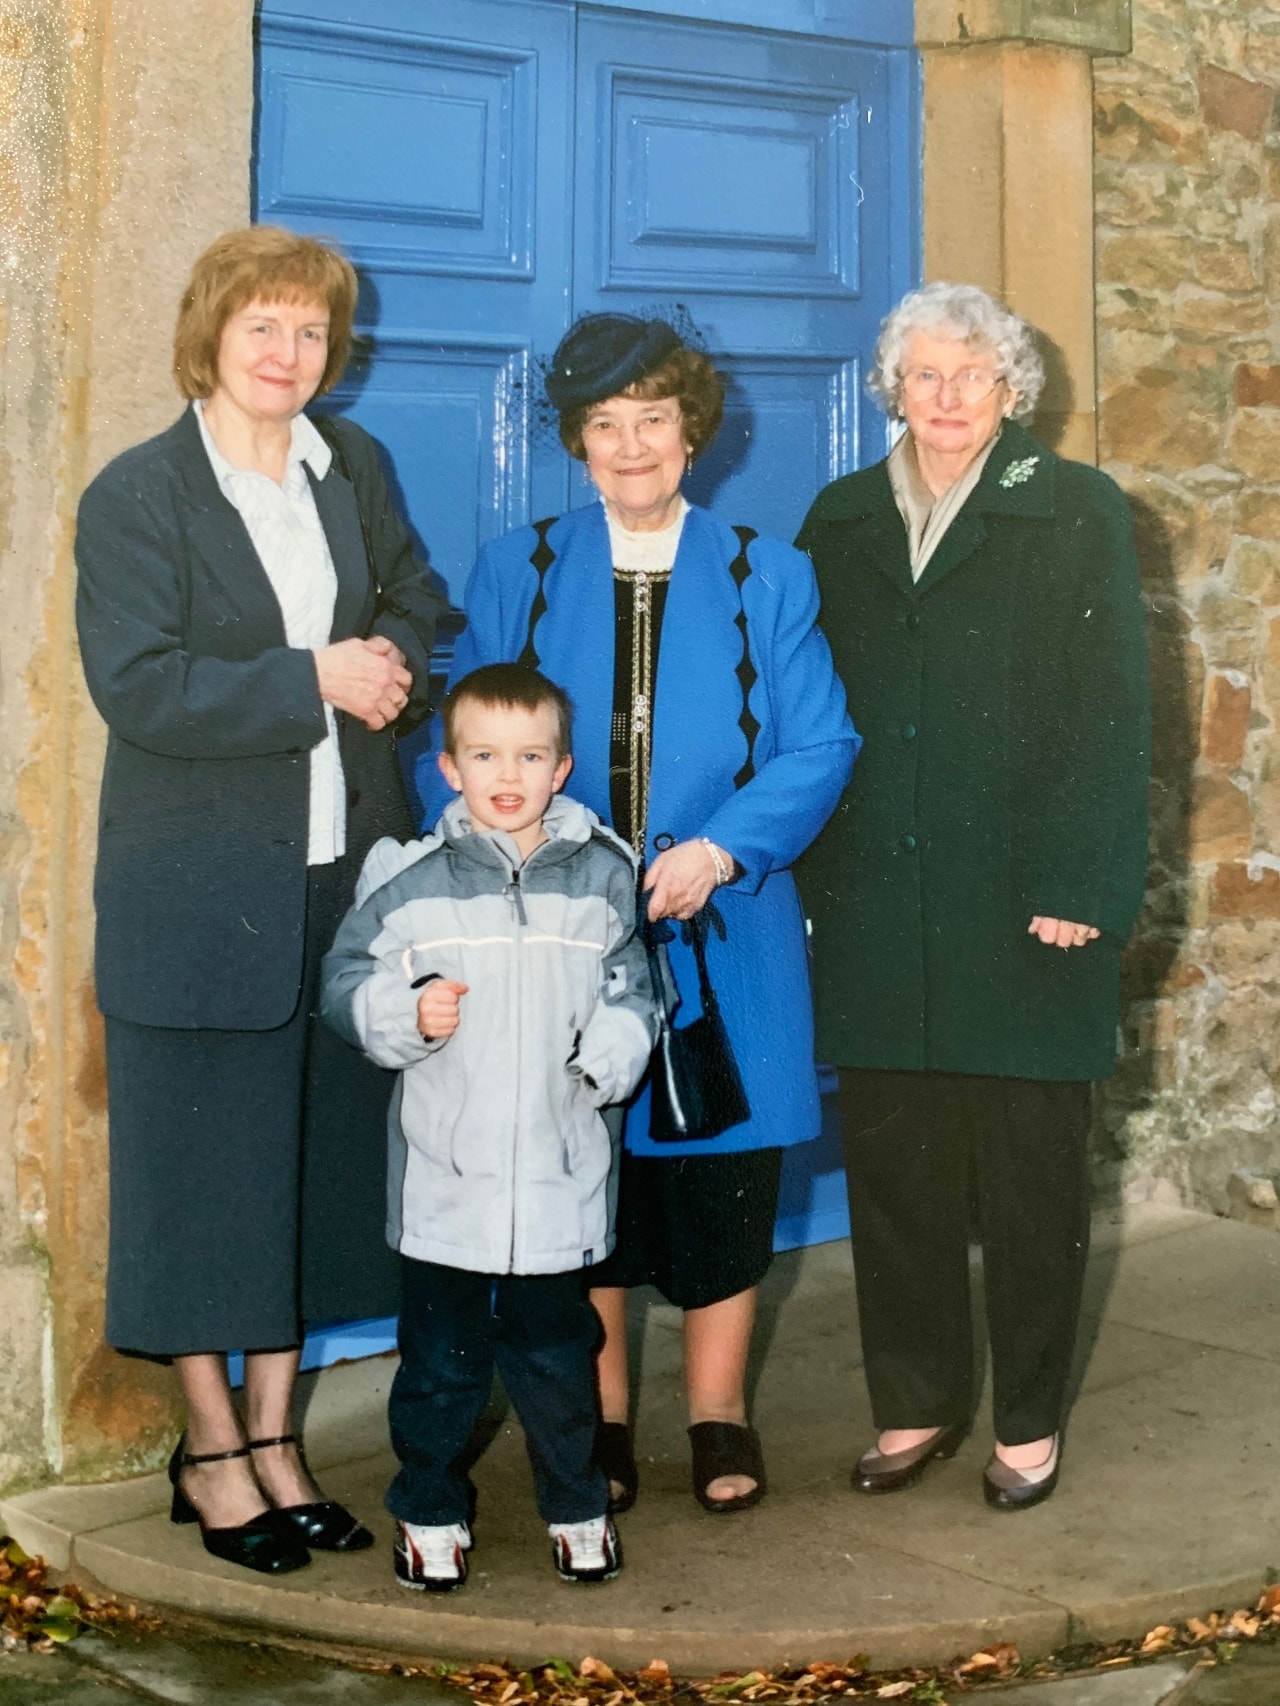 Cometan with his maternal grandmother, Hilda Warbrick (left), his paternal grandmother, Irene Taylor (centre), and his great aunt, Monica Bolton (right).